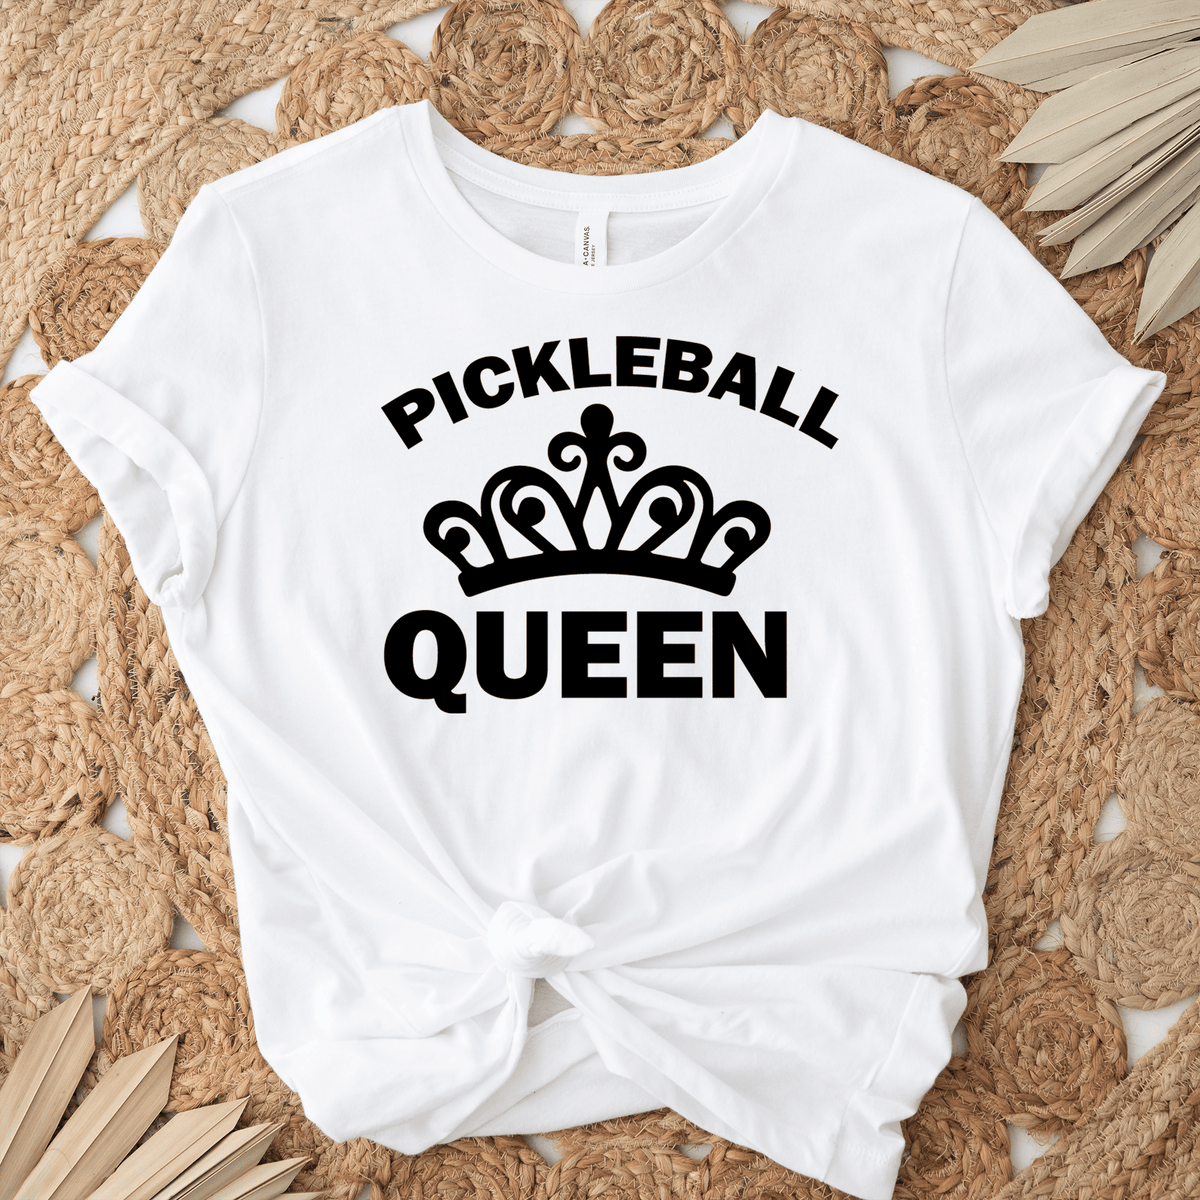 Womens White T Shirt with The-Pickleball-Queen design